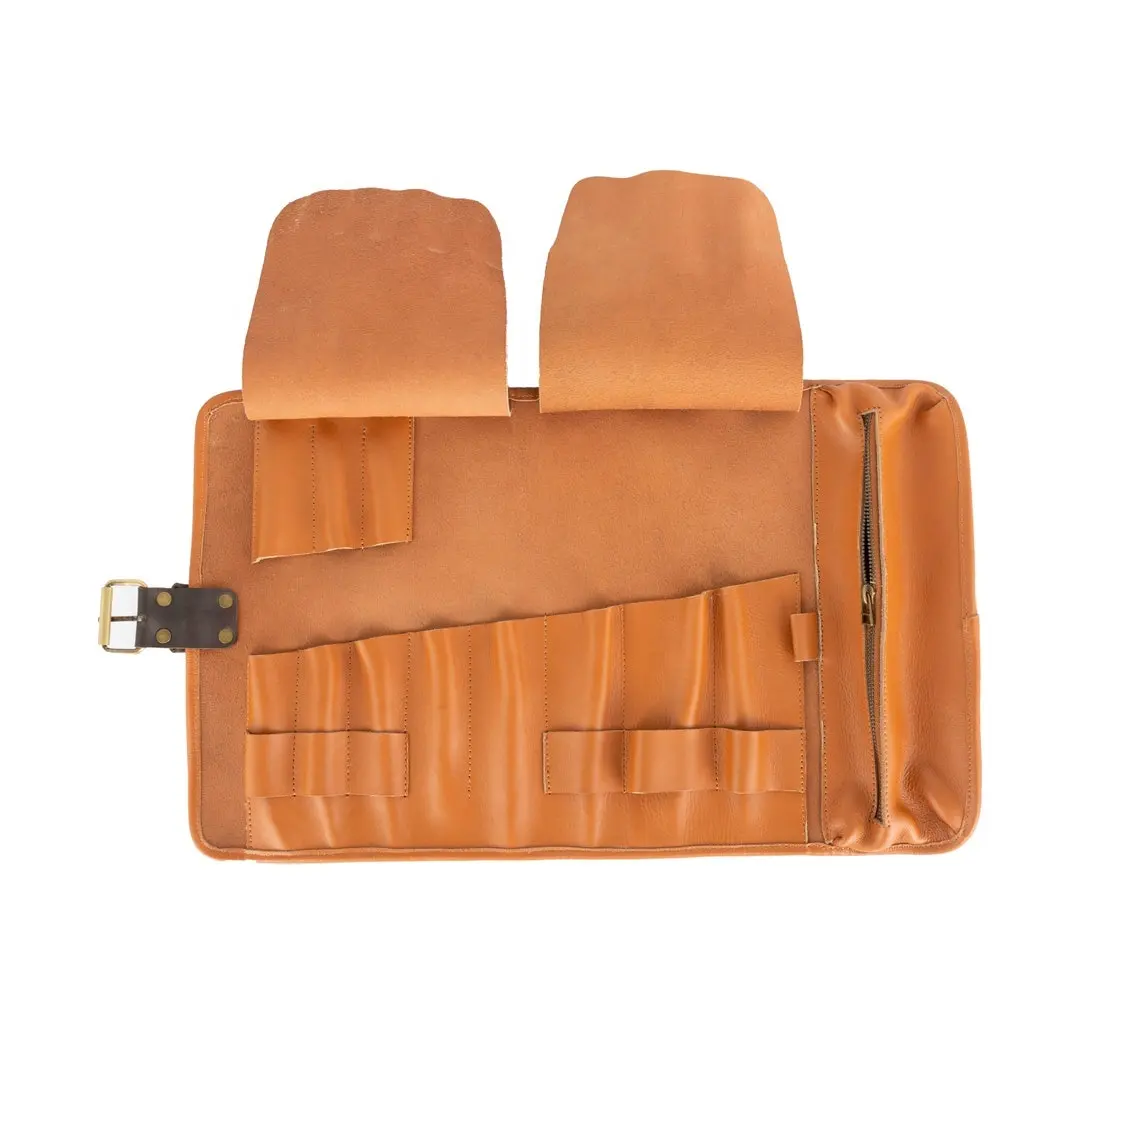 Tan Brown with Buckle Chef Sheath Roll Case, Full Grain Leather Sheath Roll For Tools barber rolling Pouch